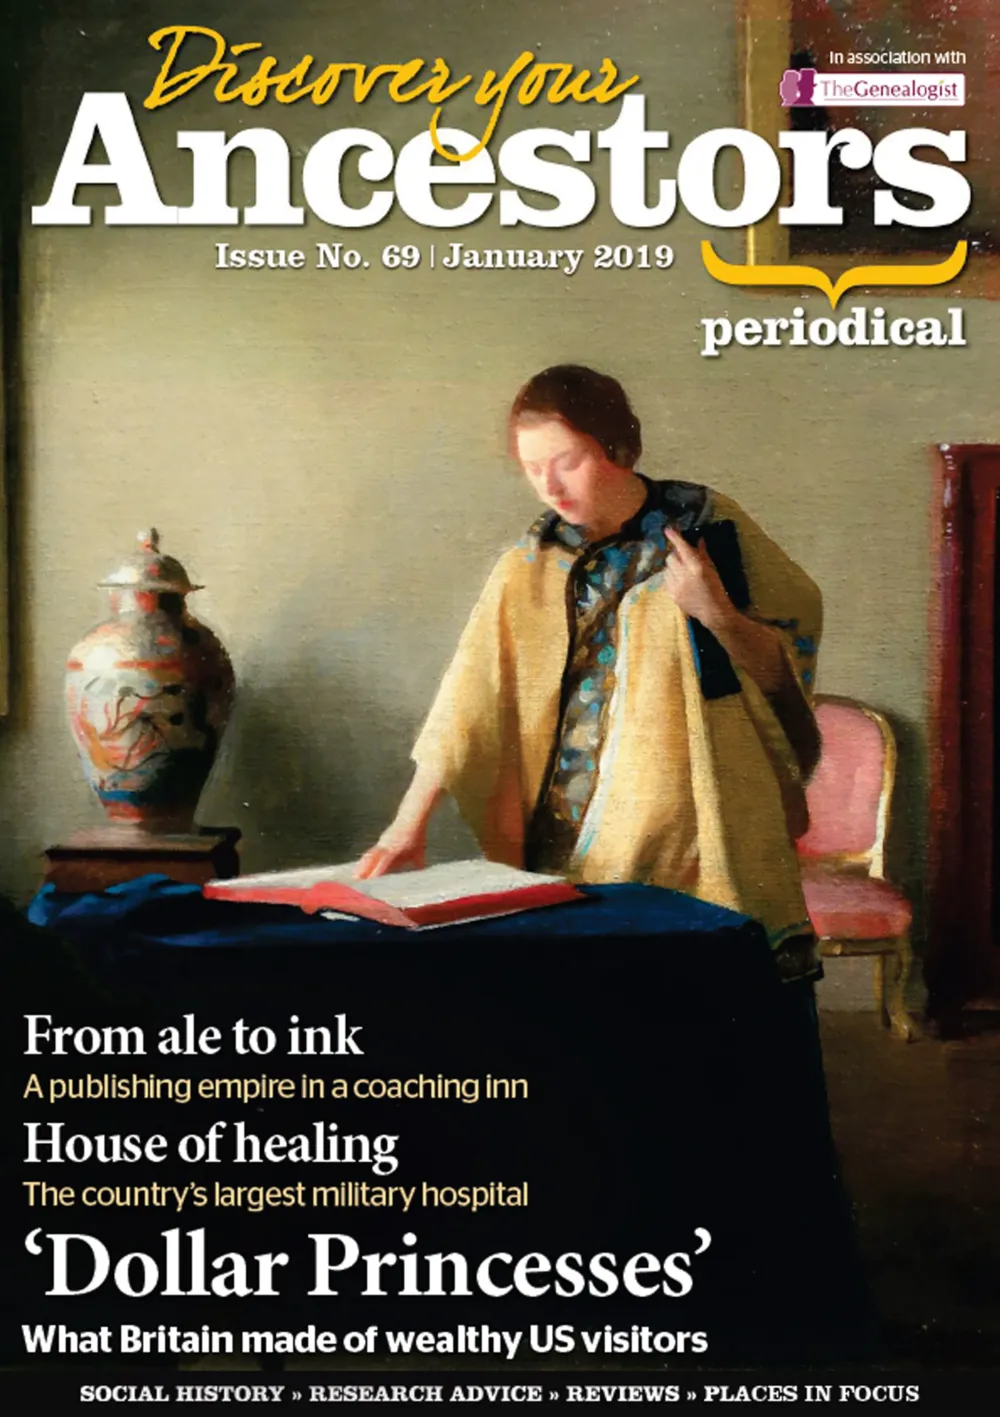 Discover Your Ancestors Periodical - January 2019